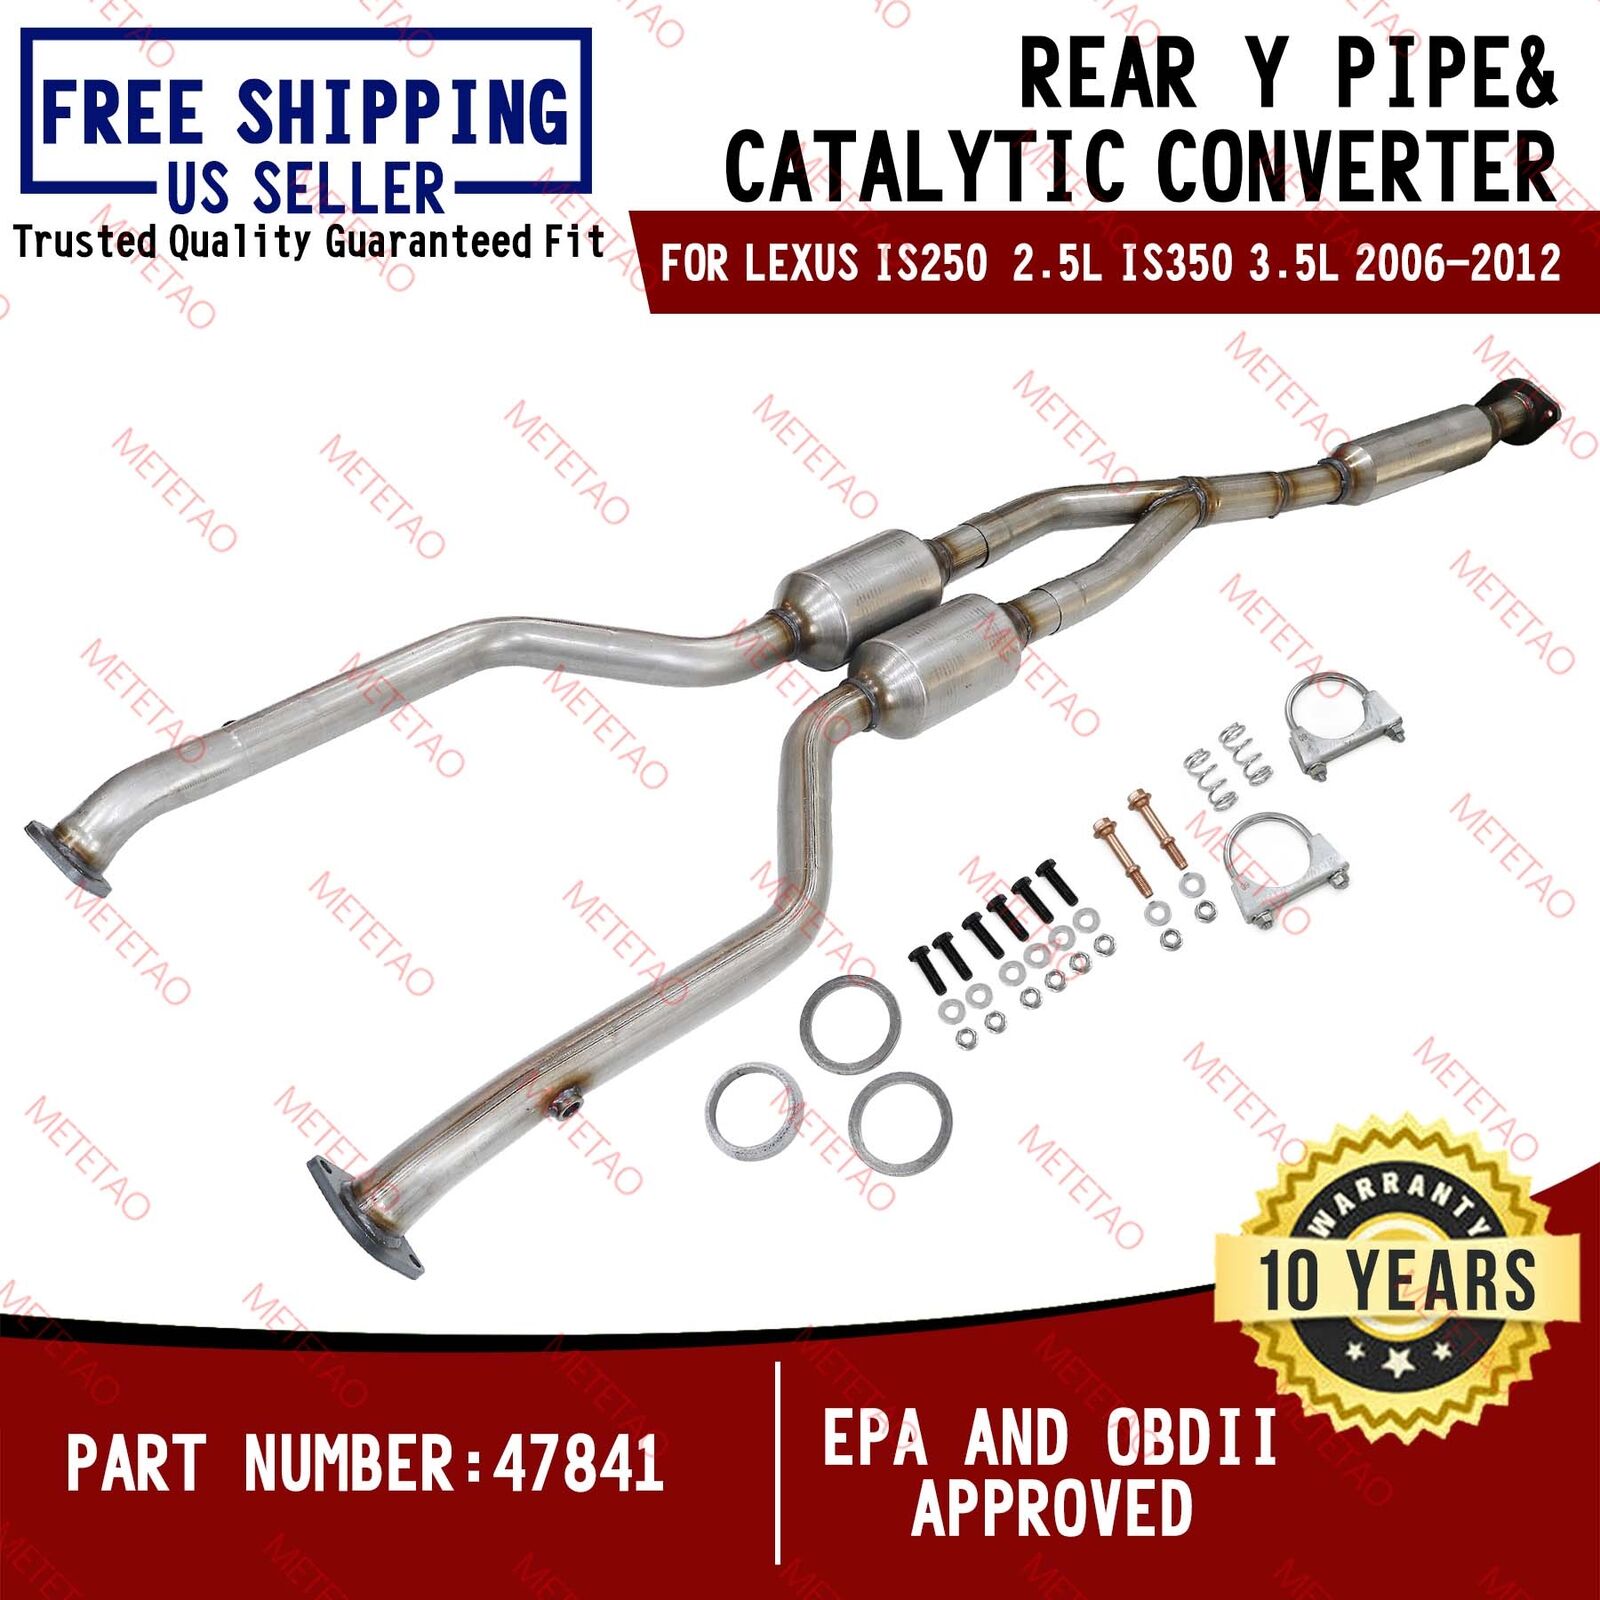 For Lexus IS250 IS350 2006-2012 Rear Y Pipe & Catalytic Converter AWD ONLY